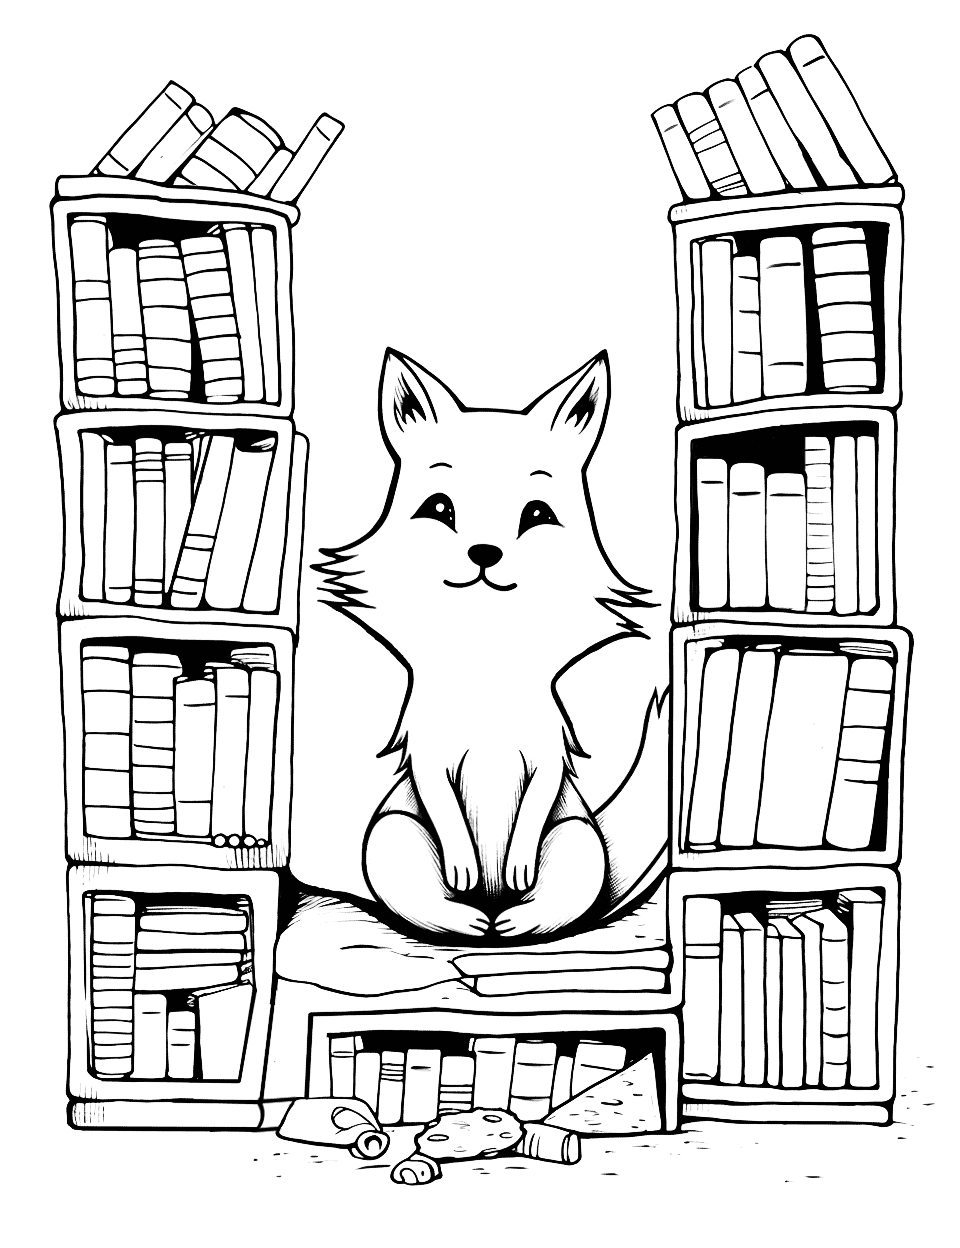 Fox's Library Day Fox Coloring Page - A book-loving fox amidst towering bookshelves.